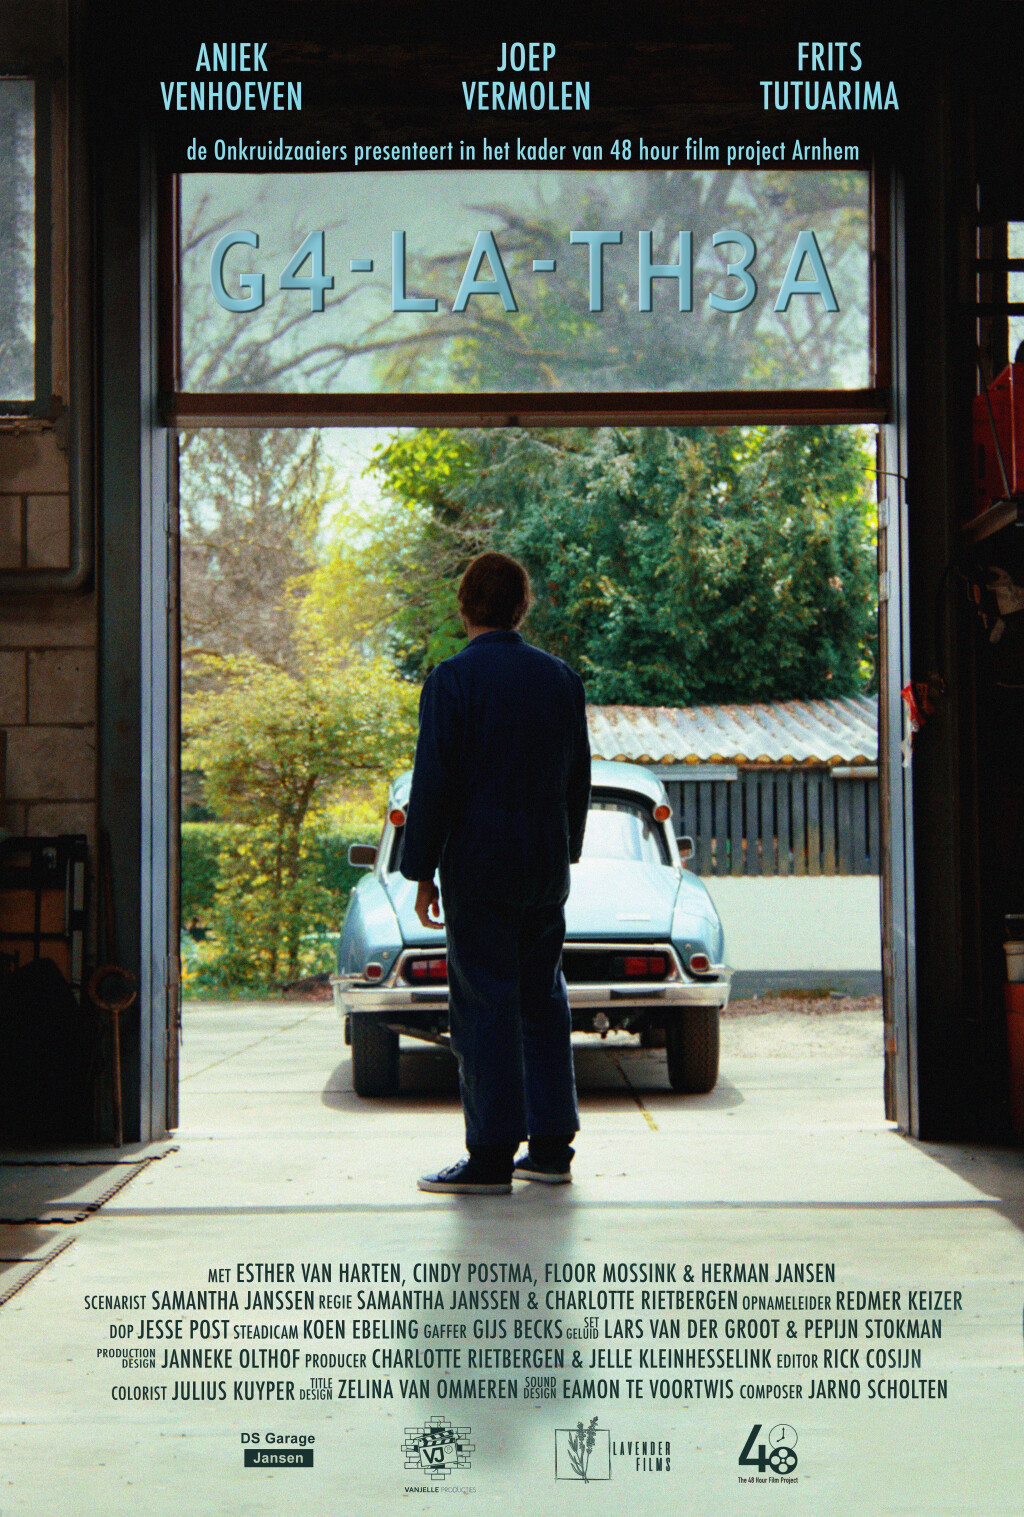 Filmposter for G4-LA-TH3A